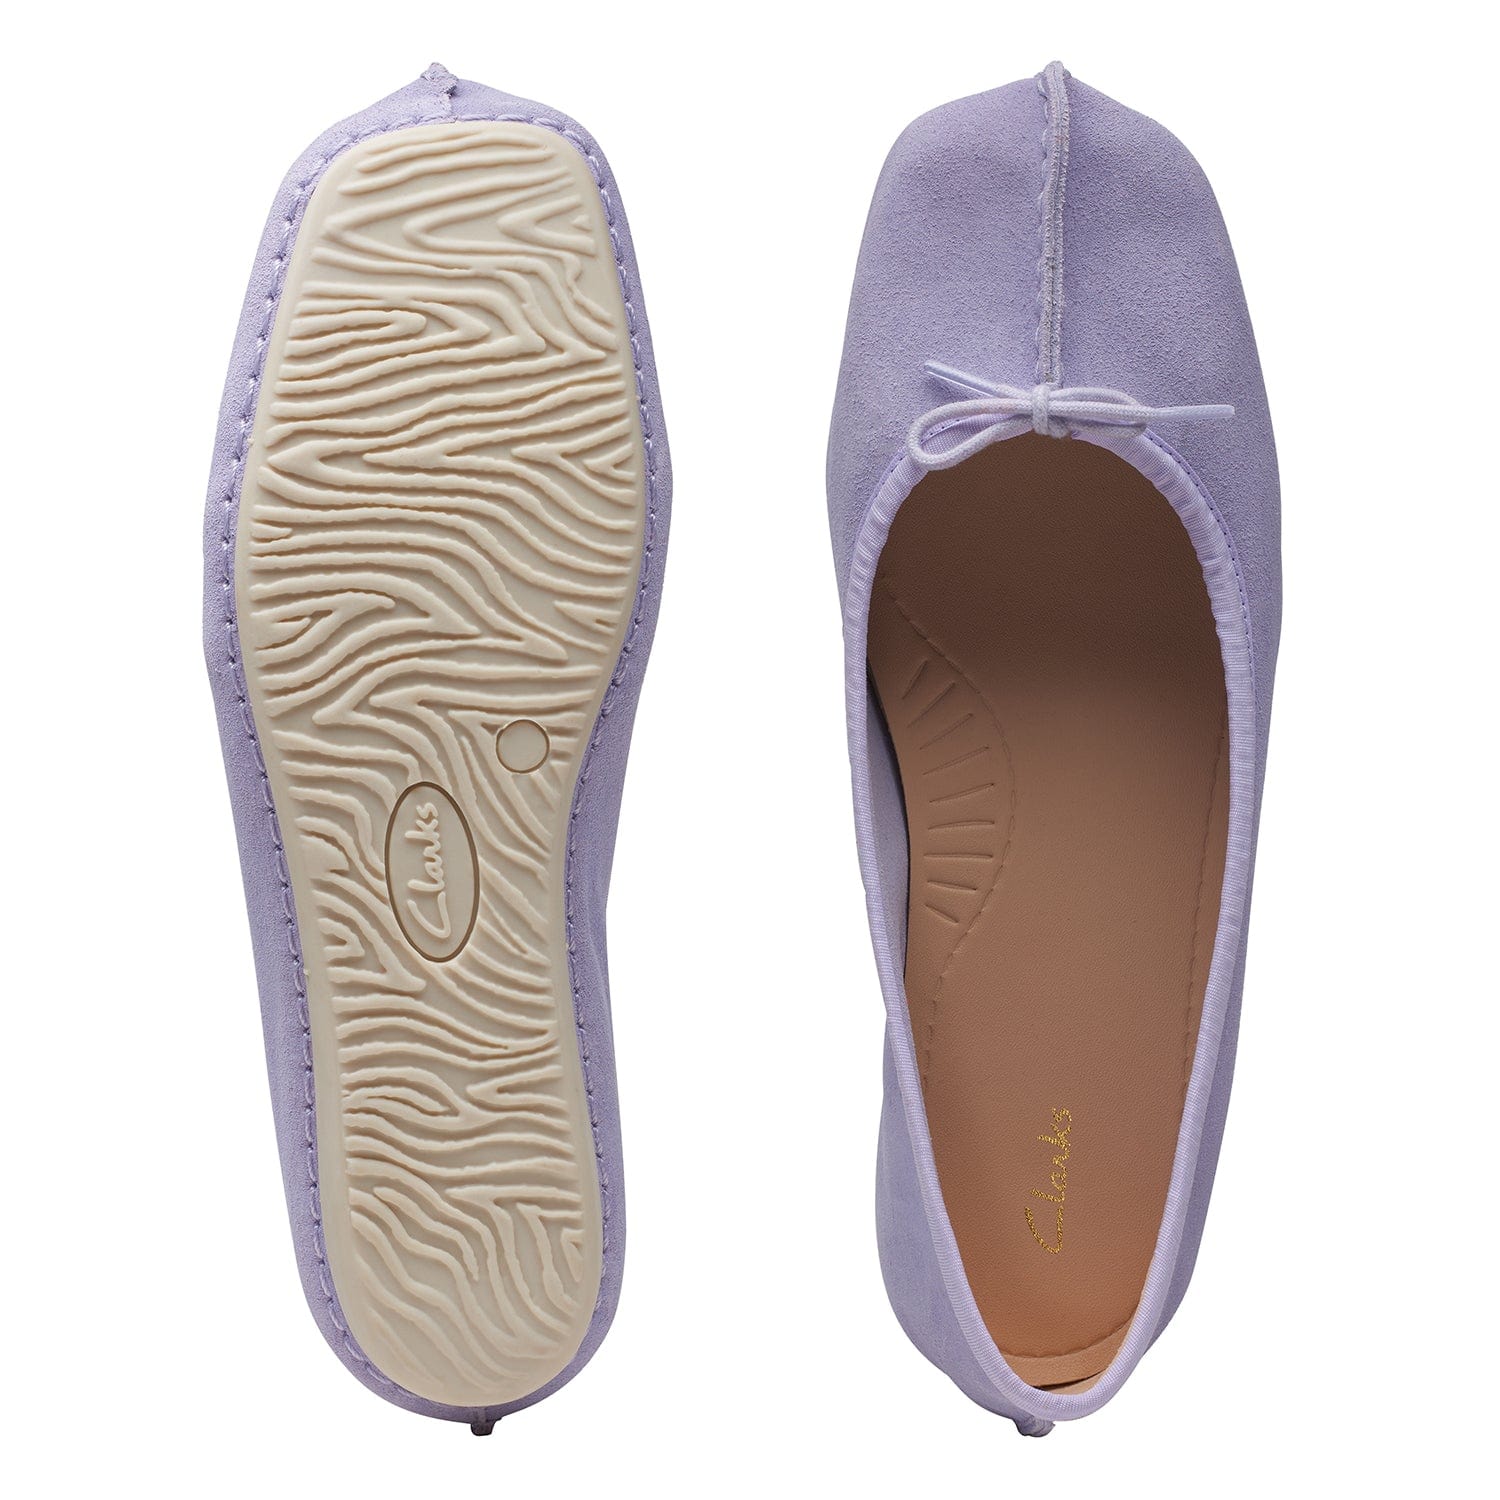 Clarks Freckle Ice - Shoes - Lilac Suede - 261709614 - D Width (Standard Fit)